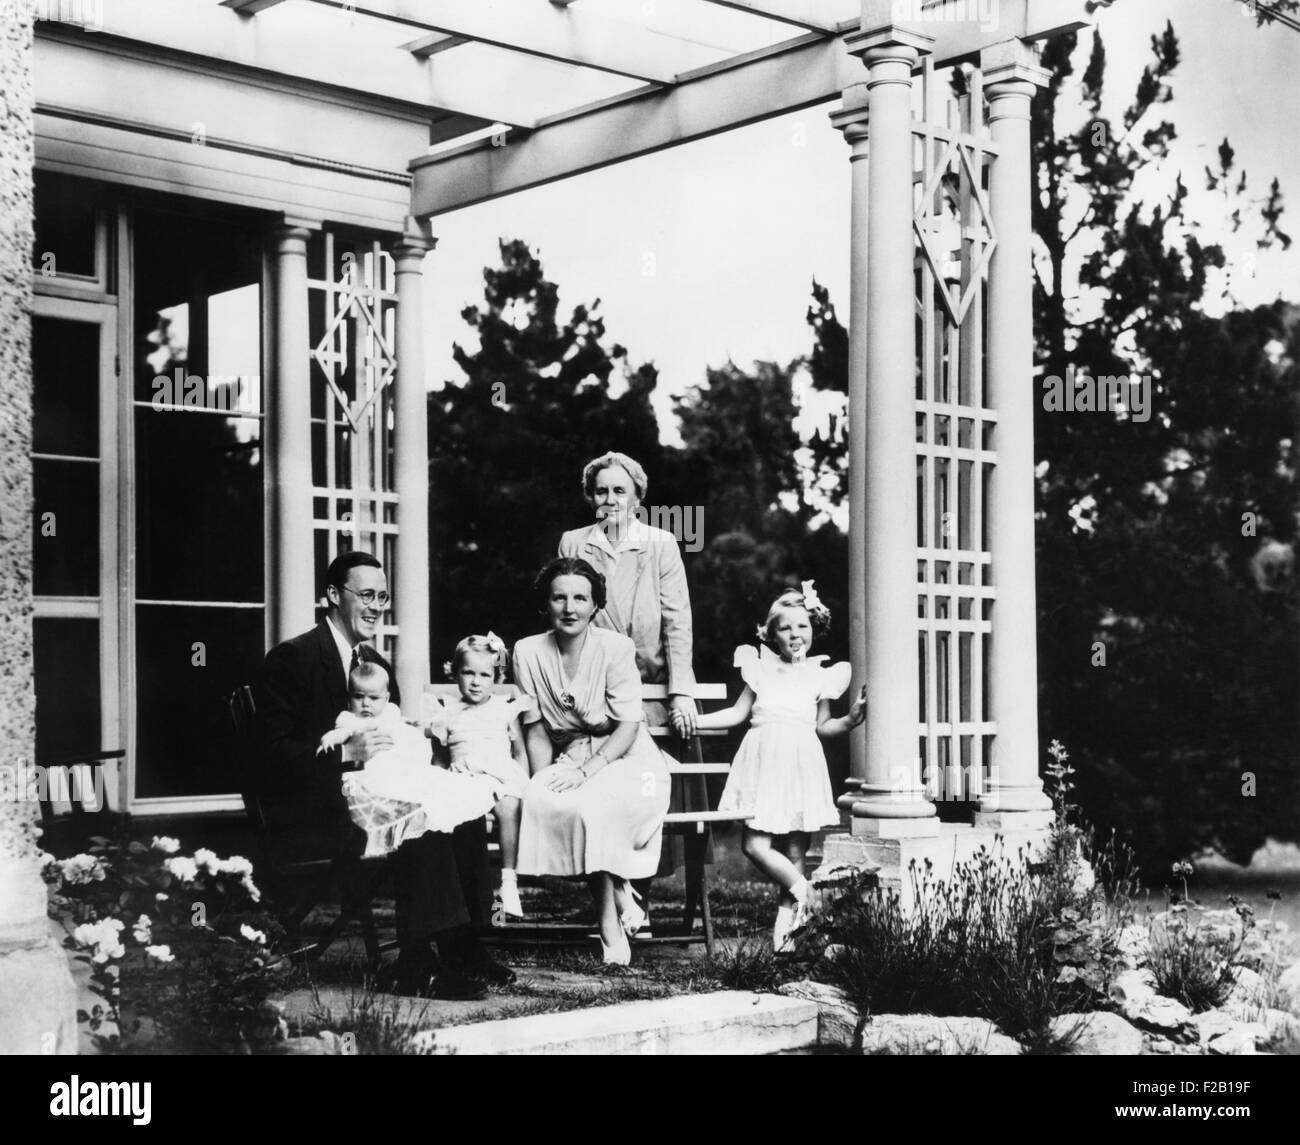 The exiled Dutch Royal Family celebrate Queen Wilhelmina's birthday on Aug. 31, 1943 in Canada. During World War II, L-R: Prince Bernhard, holding Princess Marguerite Francisca; Princess Irene; Crown Princess Juliana; Queen Wilhelmina; and Princess Beatrix. (CSU 2015 8 640) Stock Photo